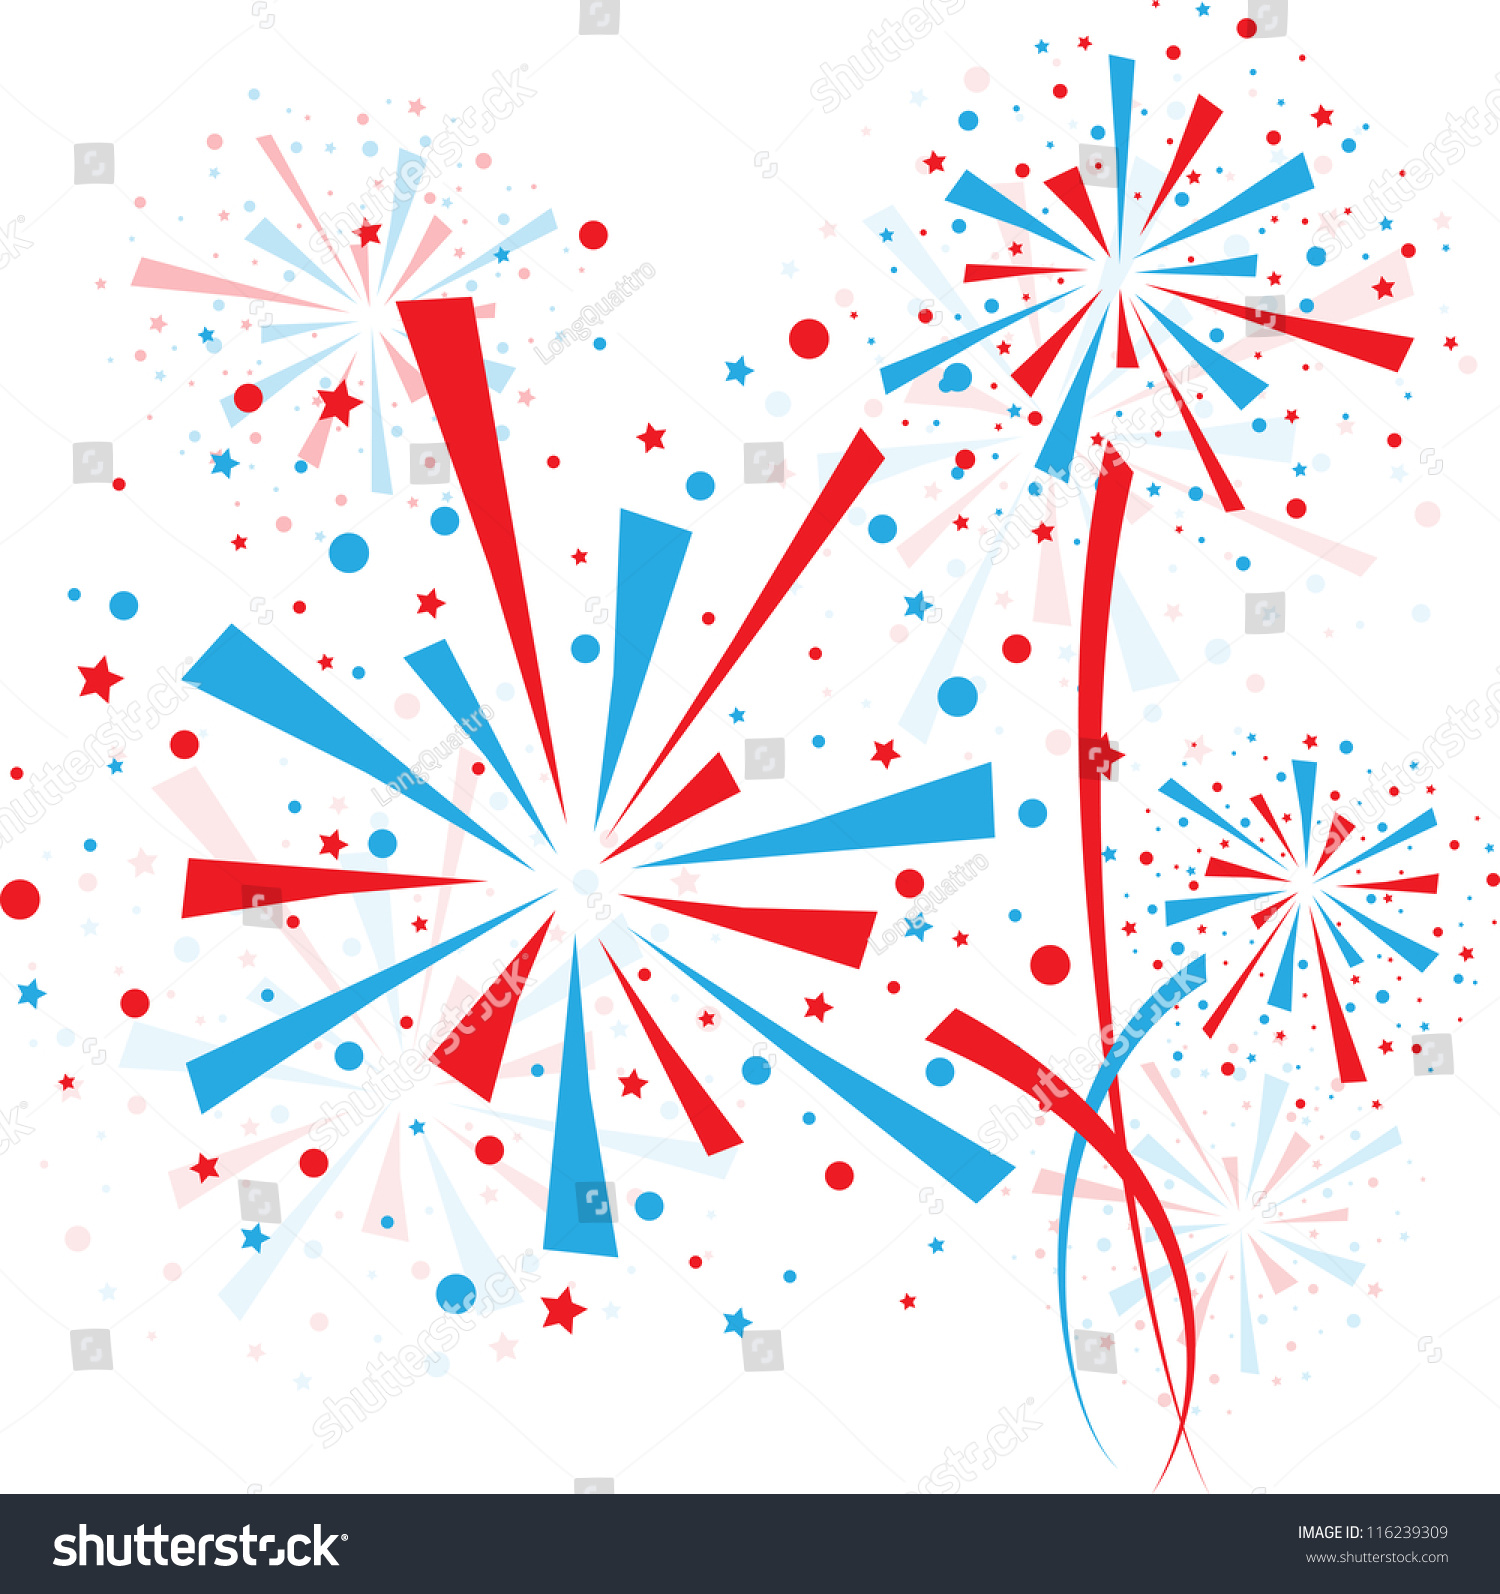 Big Red And Blue Fireworks On White Background Stock ...